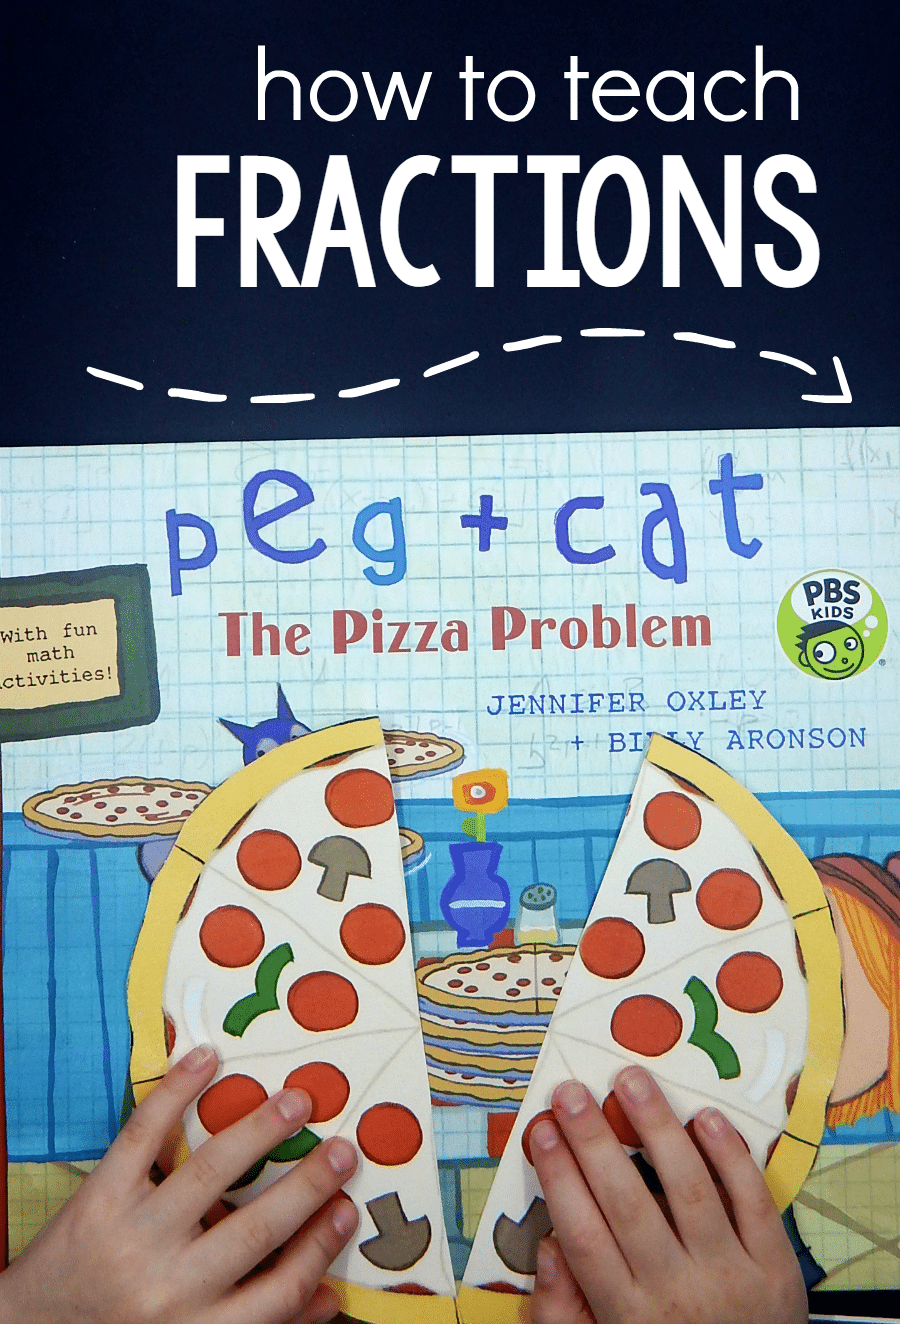 How to teach fractions - The Measured Mom